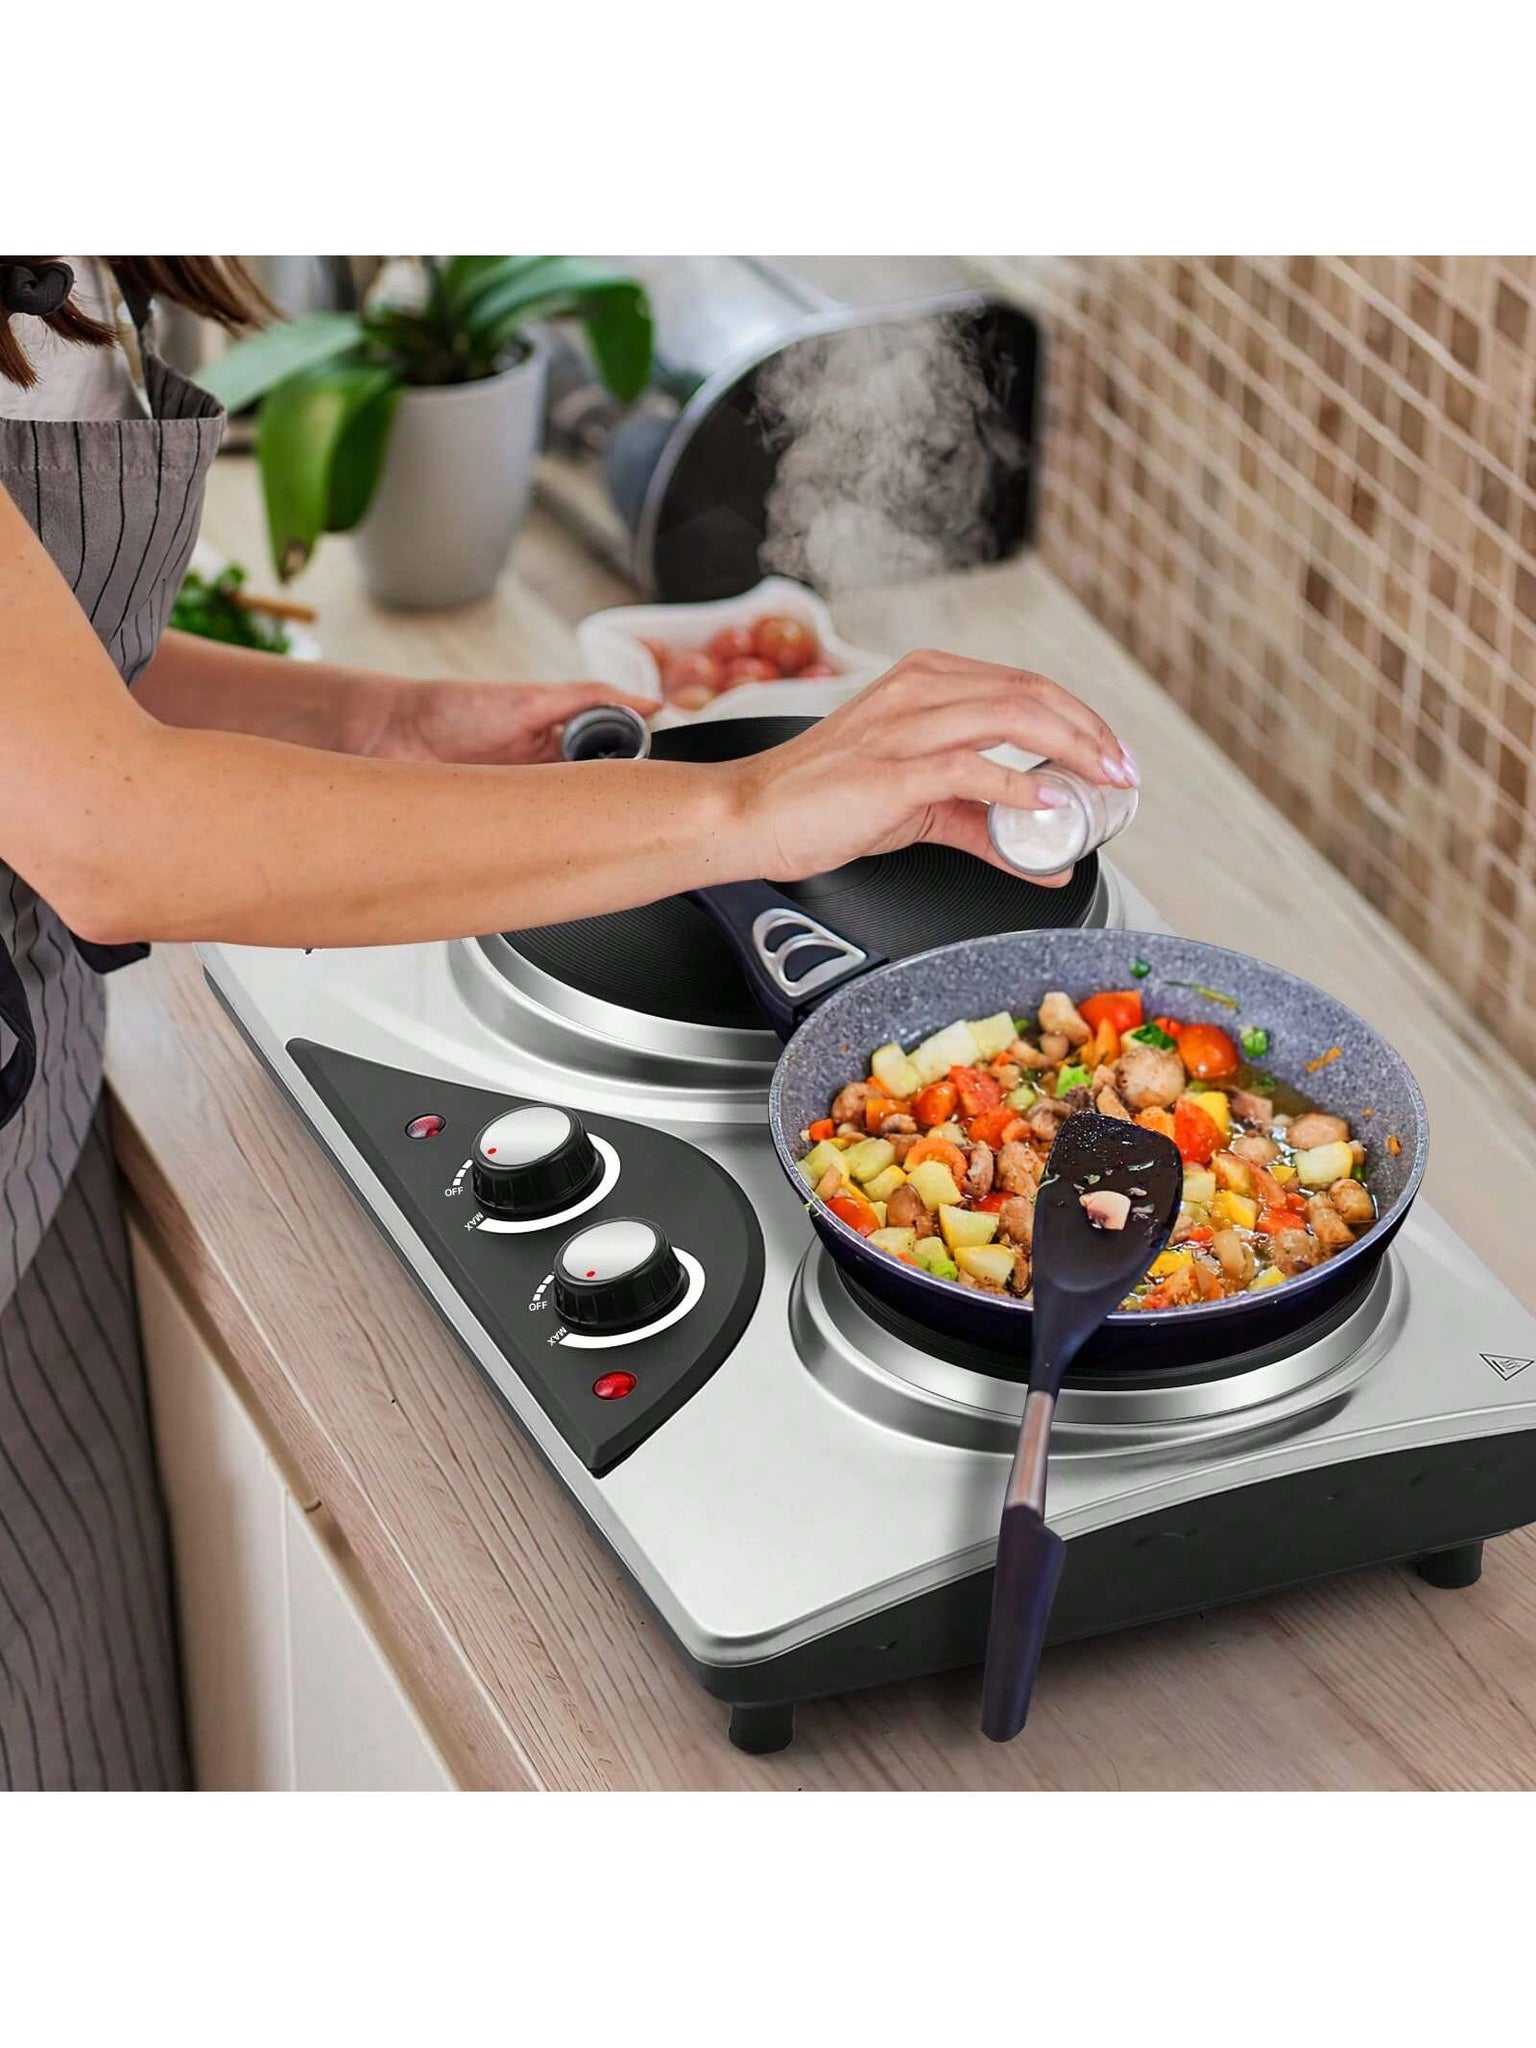 CUSIMAX Hot Plate, Electric Double Burner, 1800W Cast Iron Countertop  Cooktop, Portable for Cooking, Compatible for All Cookwares, Easy Clean